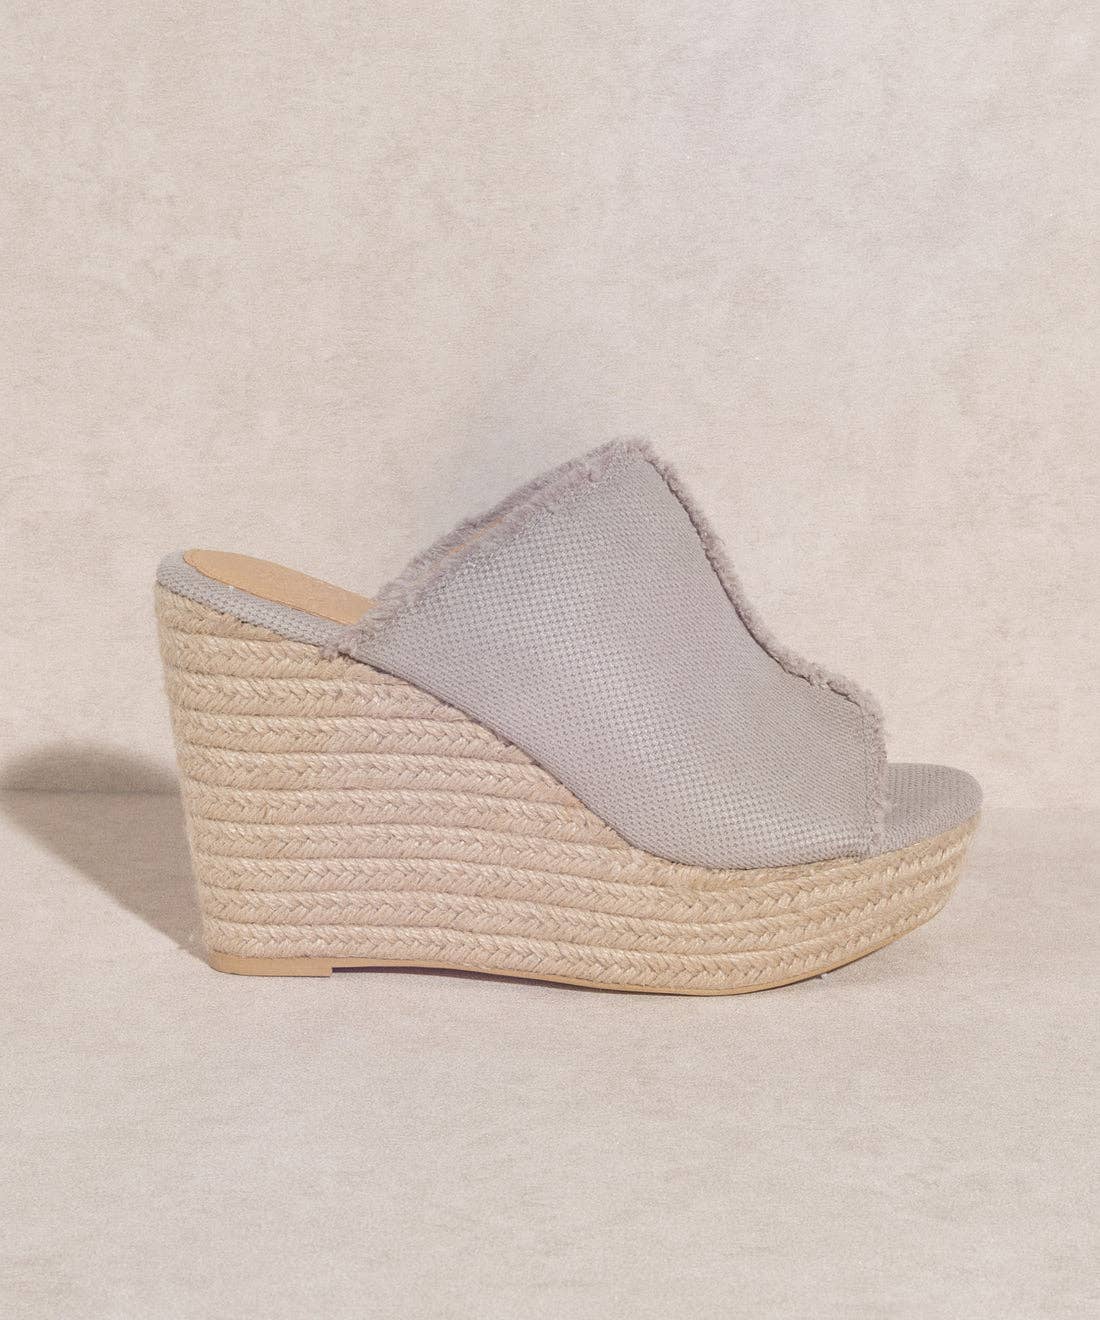 The Bliss Wedge